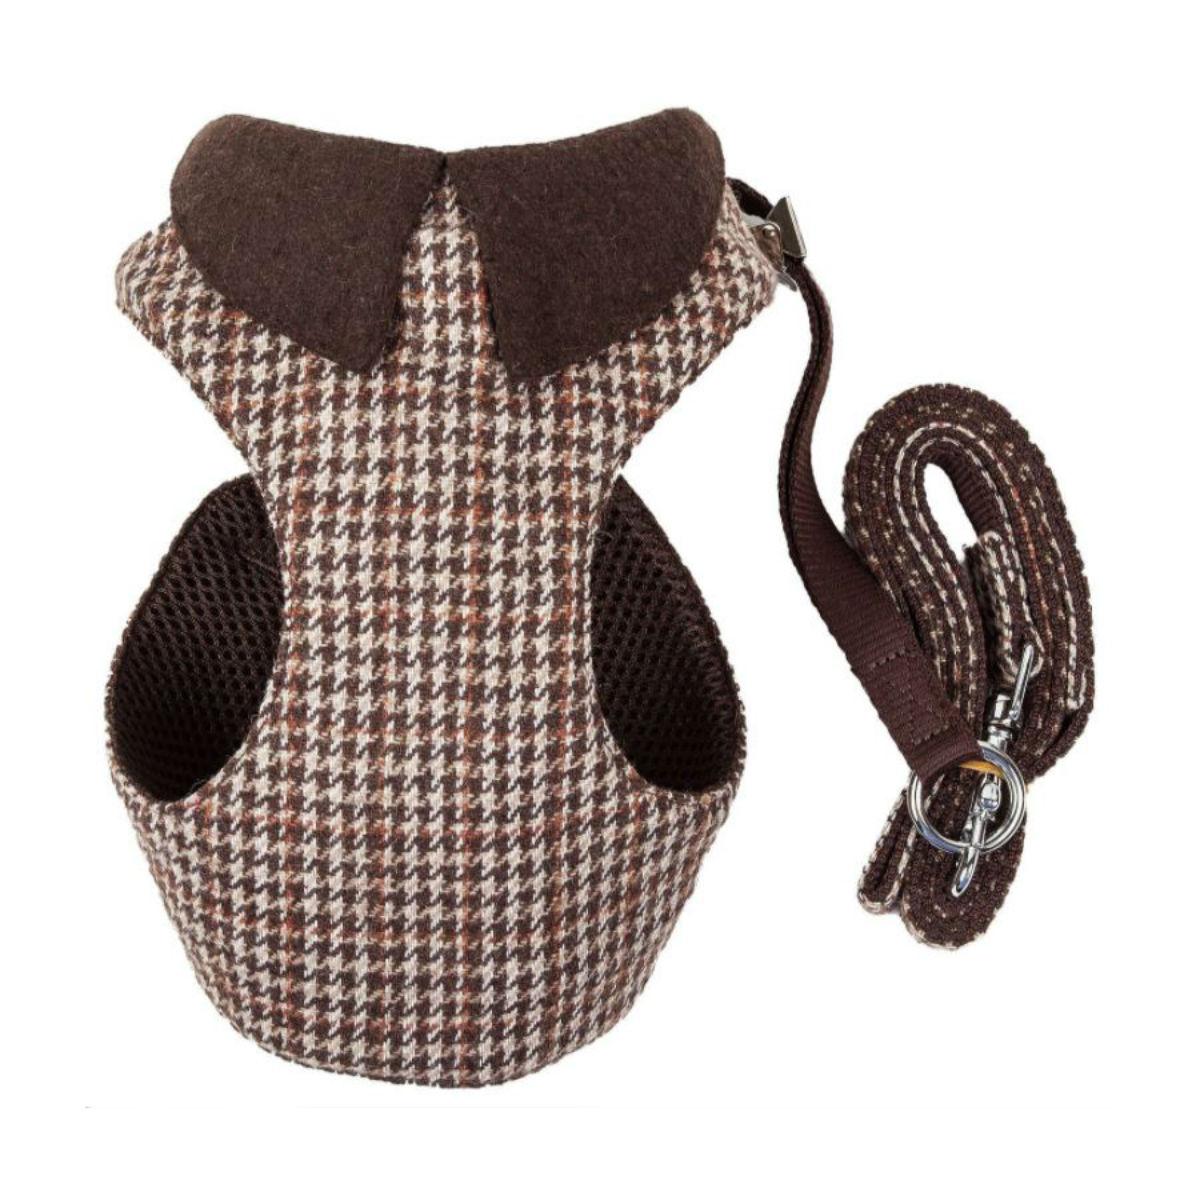 Pet Life Luxe Houndsome Dog Harness and Leash - Brown